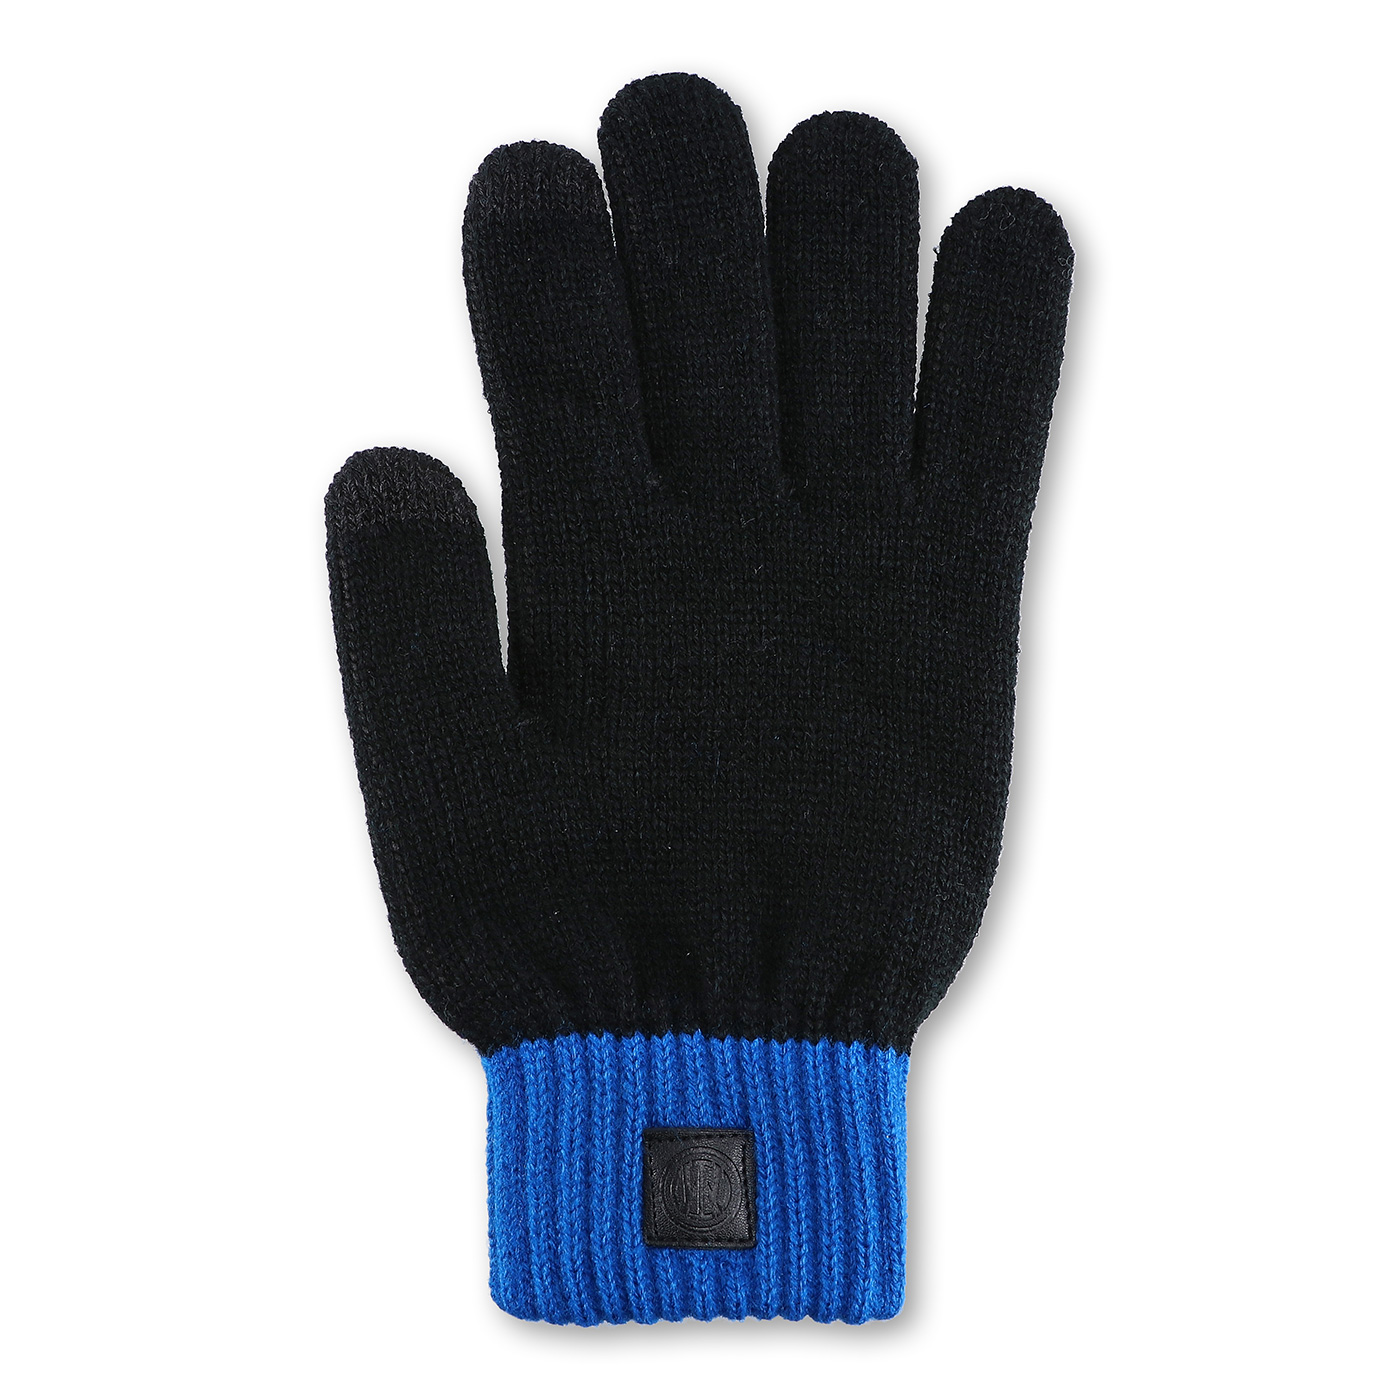 Image IM GLOVES WITH LEATHER LABEL - 1 